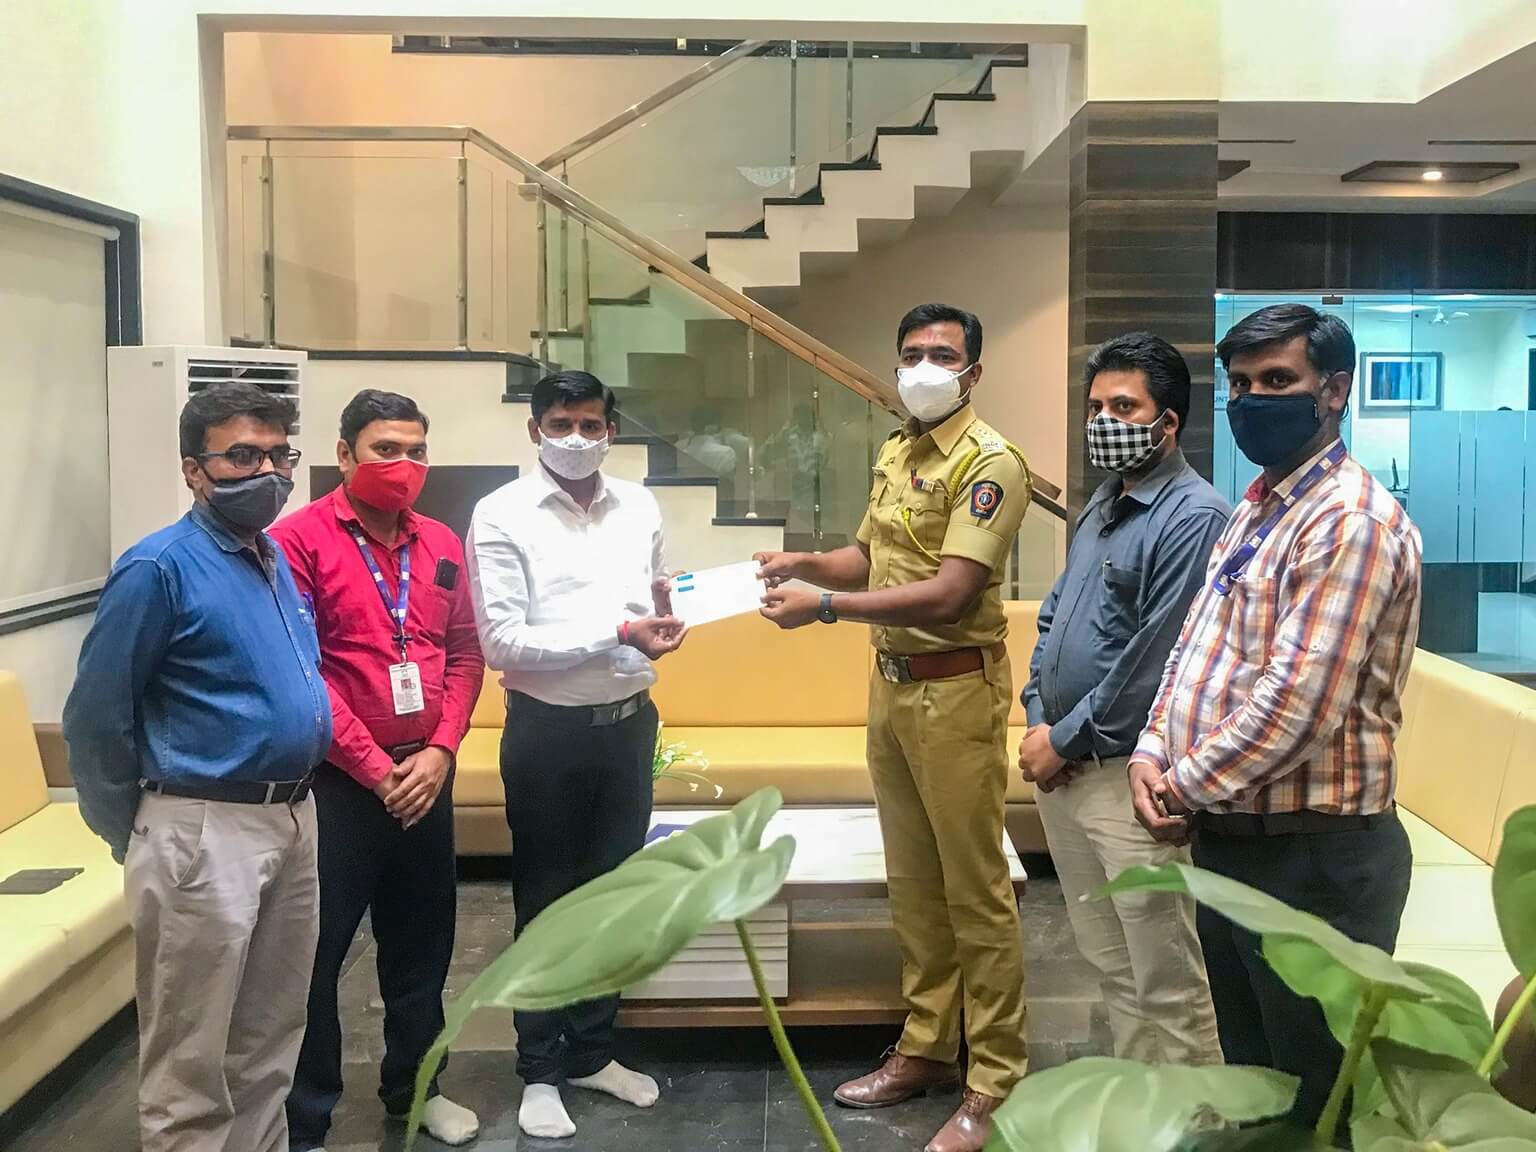 To help in the dire situation of the Covid-19 pandemic and respond to the appeal of Aurangabad IPS officer Hon’ble Smt. Mokshada Patil, Tirumala Oil Refinery, Gangapur on behalf of Kute Group Foundation, handed over a cheque of Rs. 2 lakh to Hon’ble DYSP Sandeep Gavit and Inspector of Police Sanjay Lohkare for better health of Aurangabad Rural District Police Officers, Staffs, and their family members.